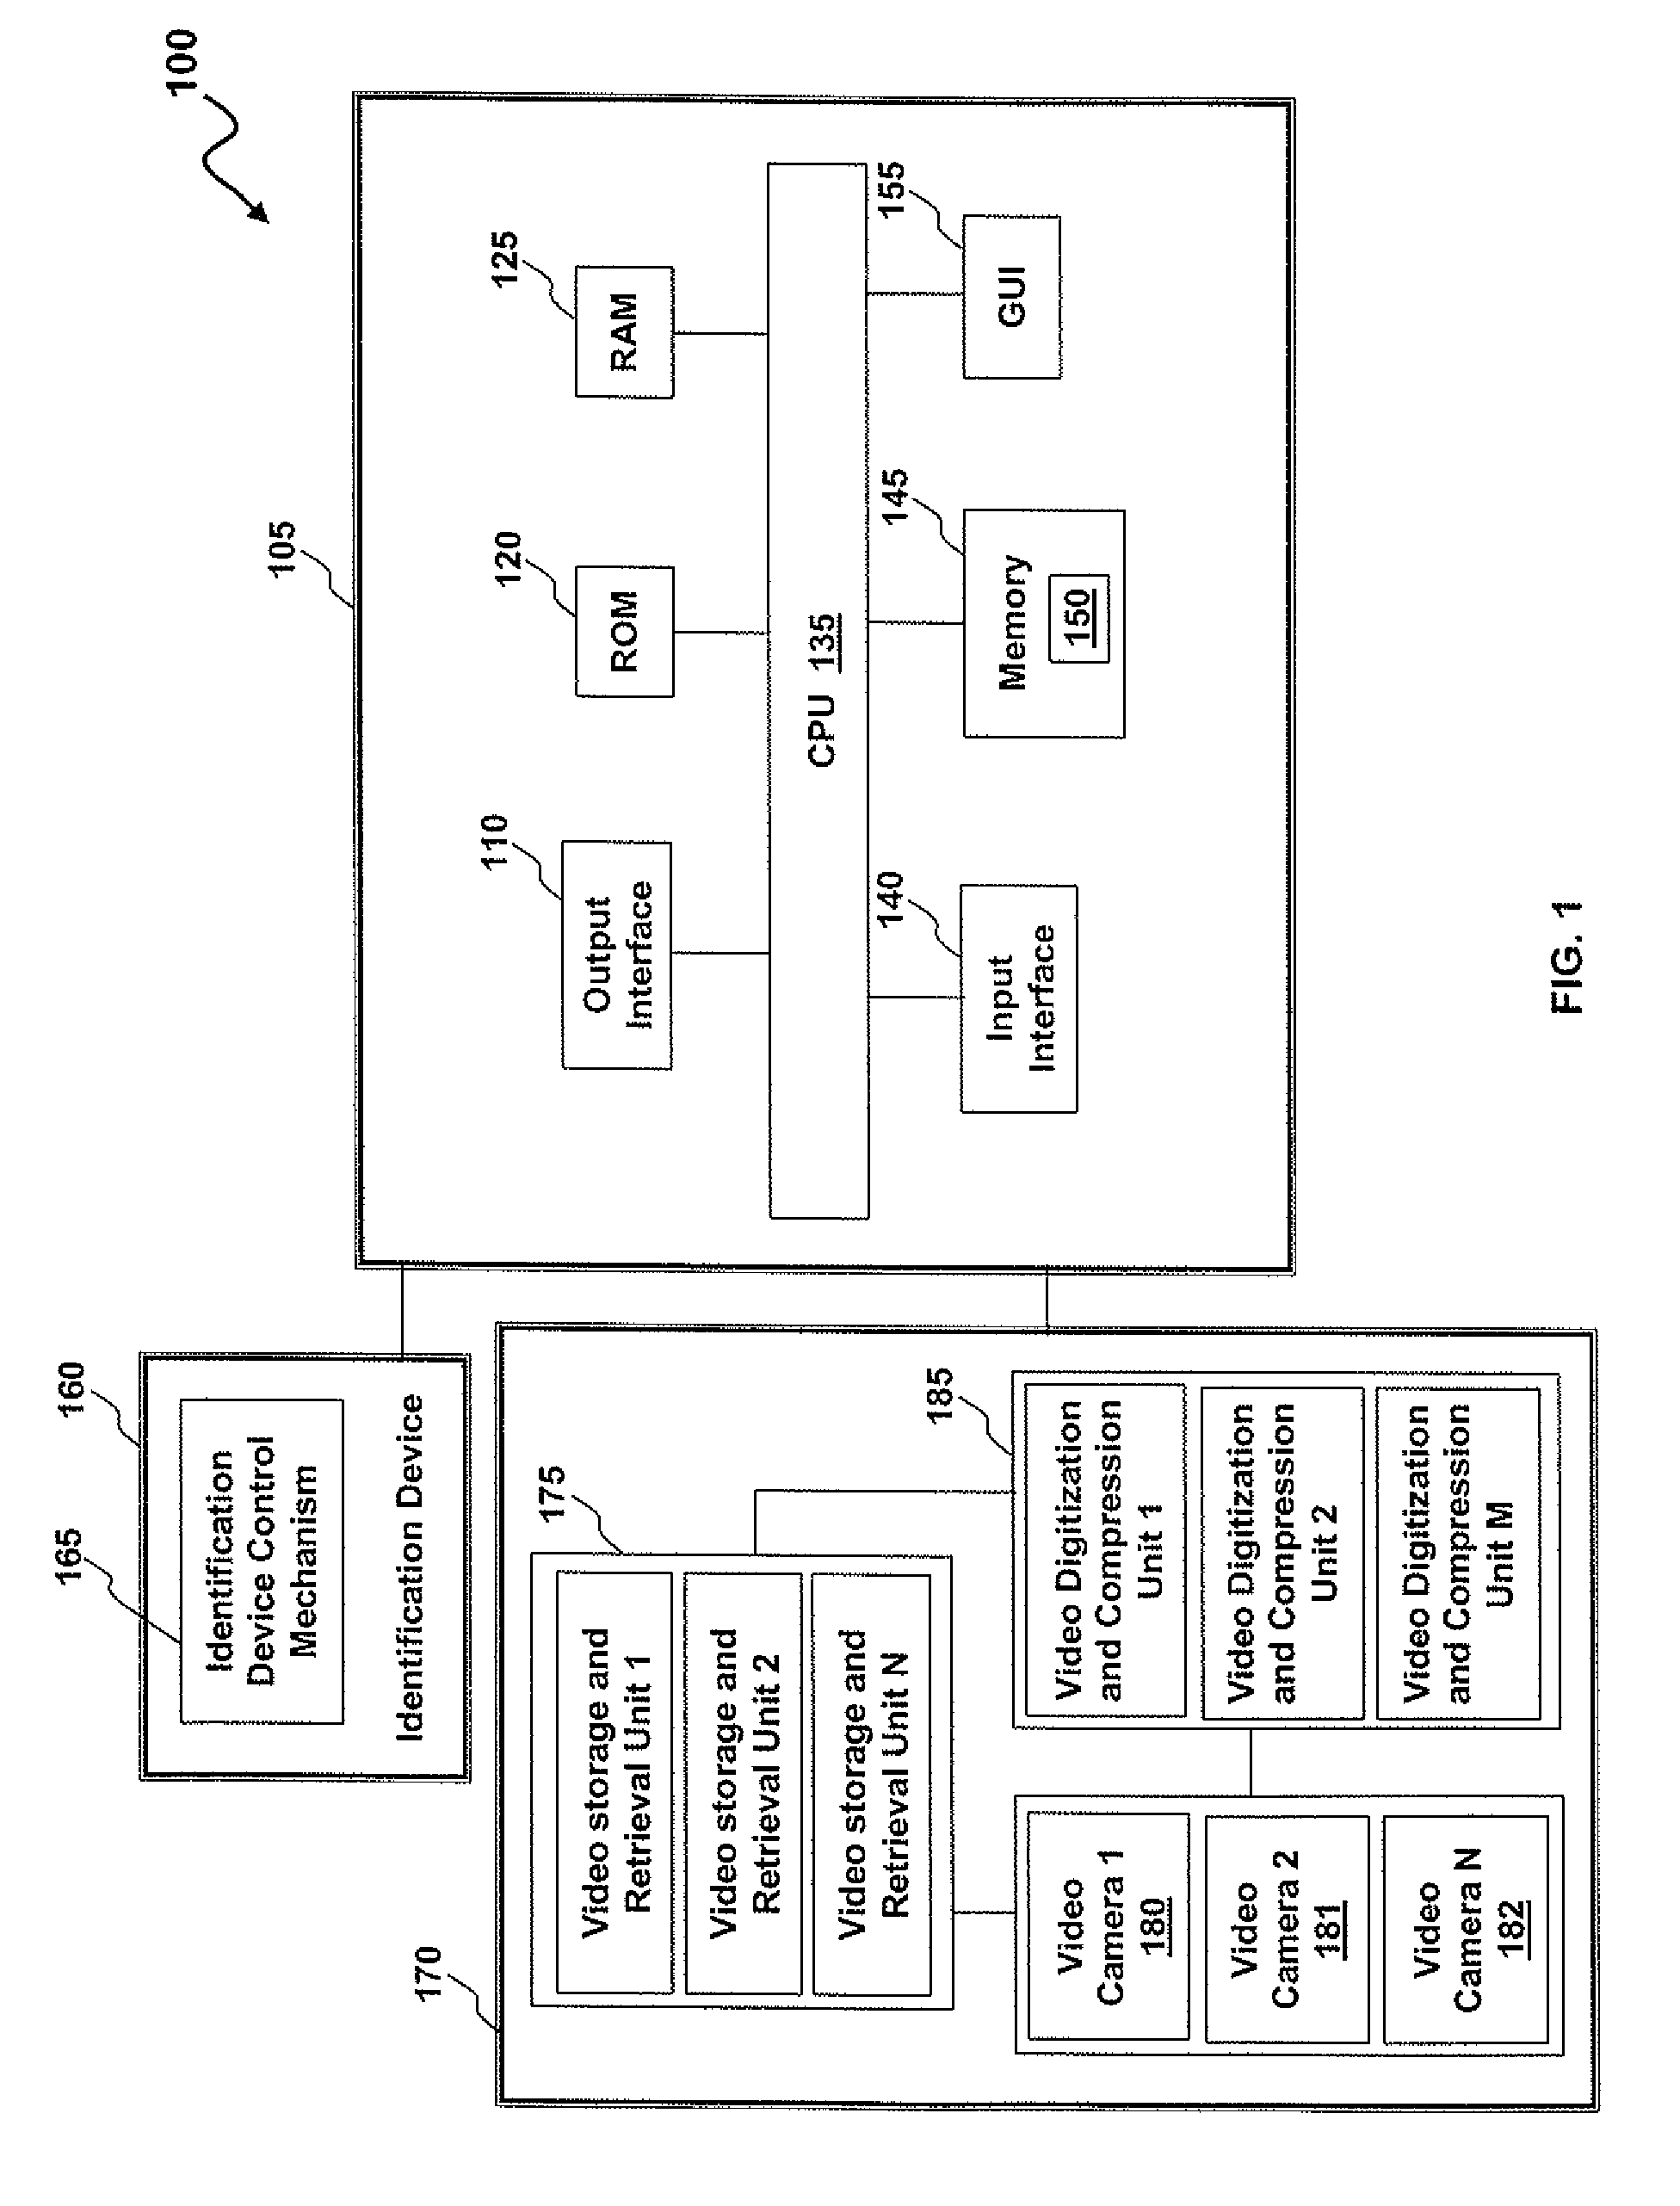 Video-enabled rapid response system and method